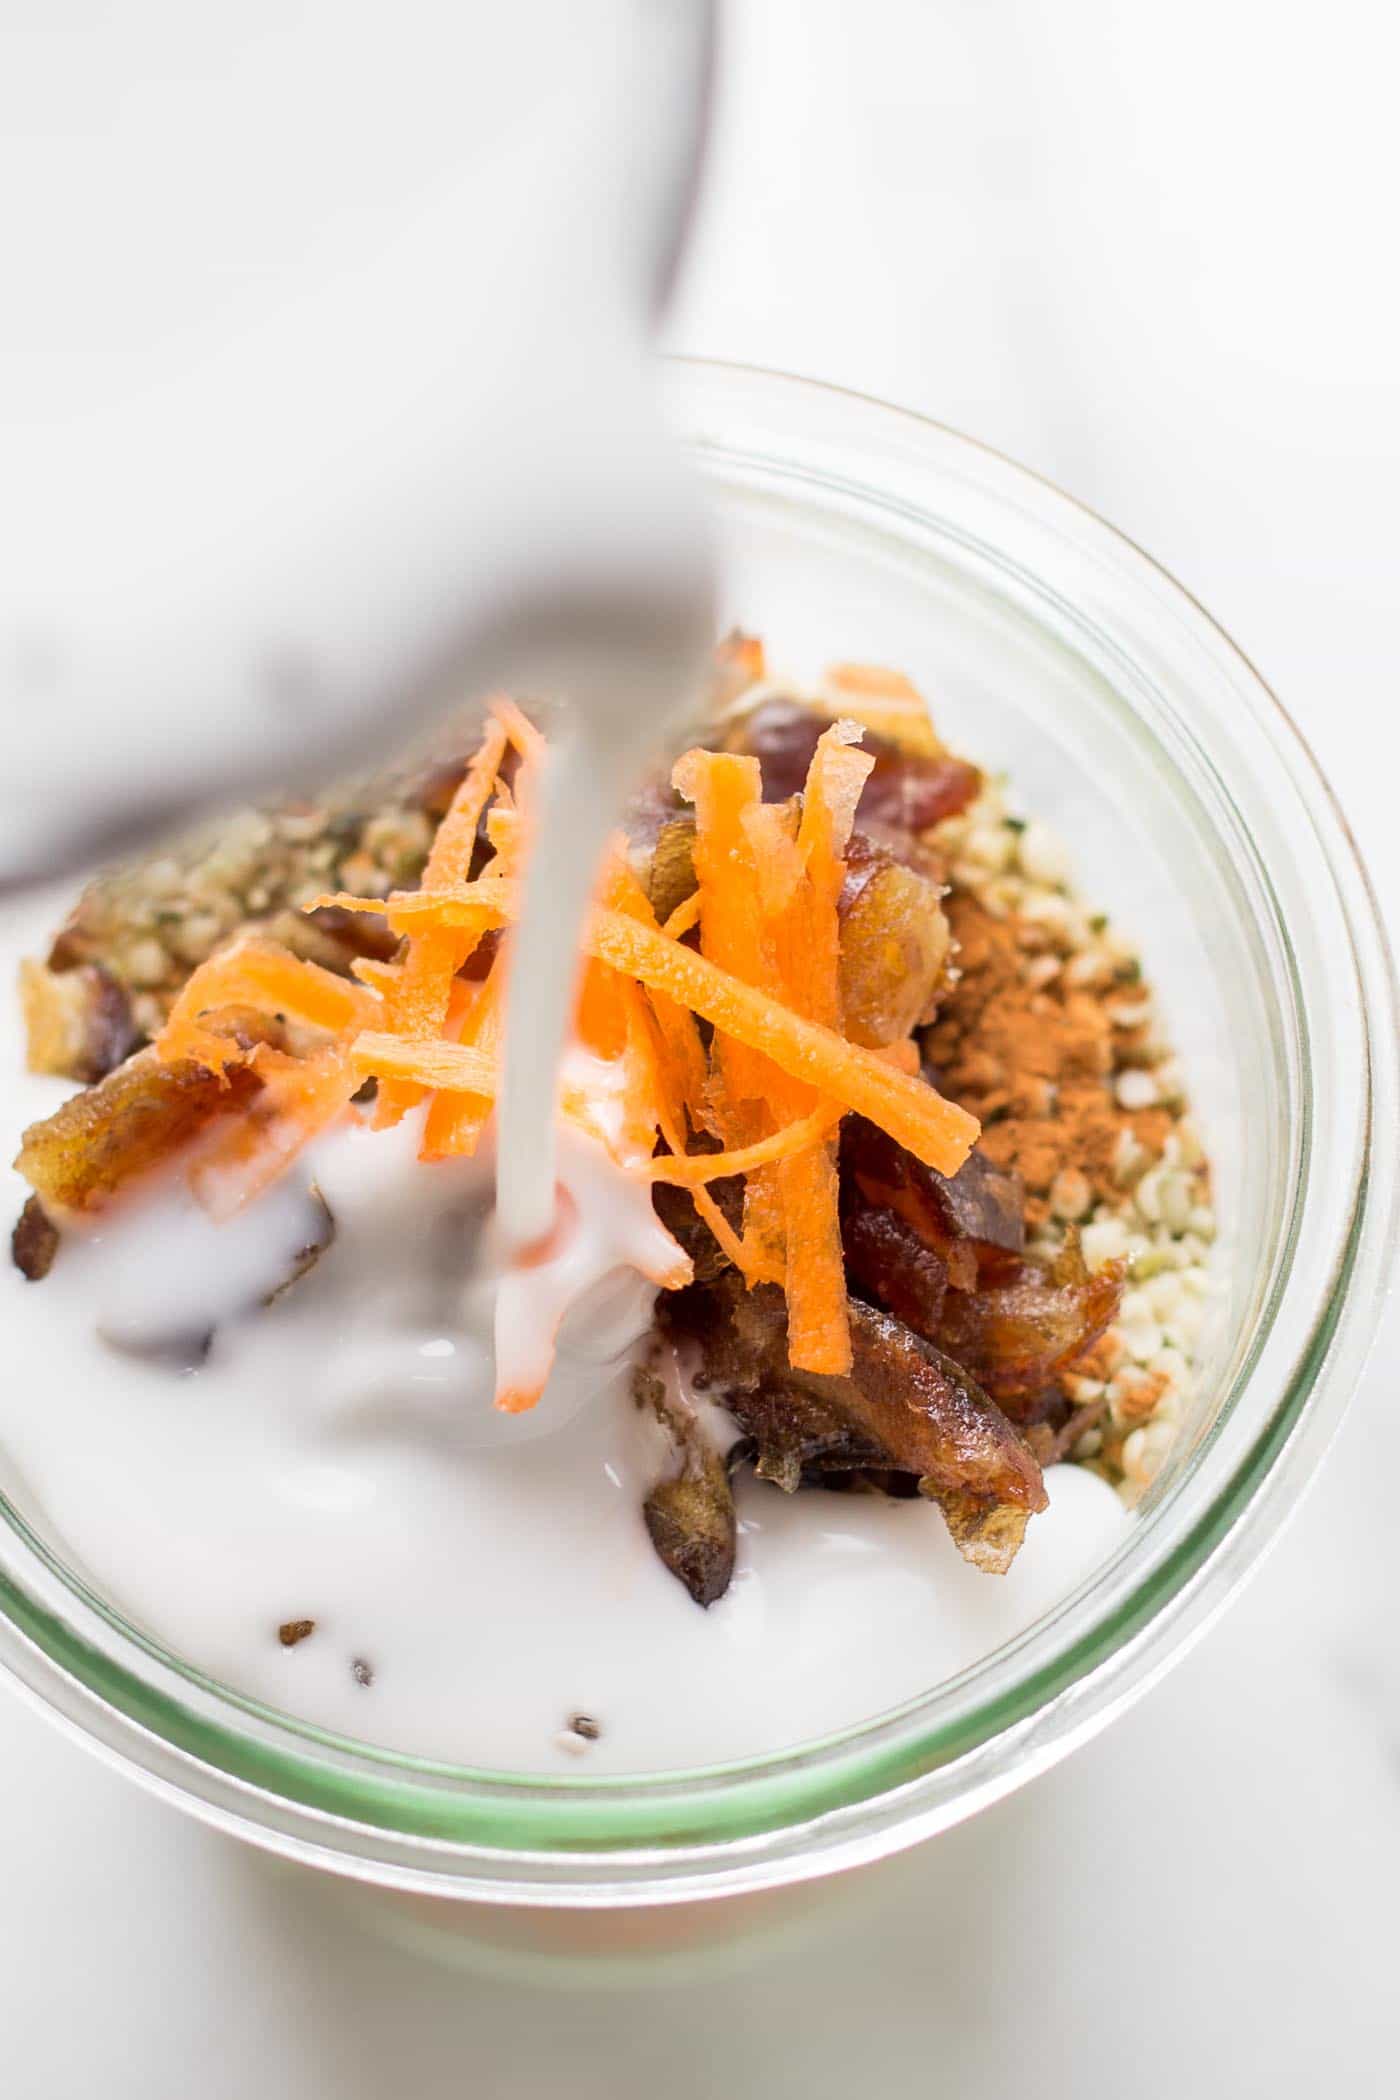 Classic carrot cake flavors transformed into a healthy breakfast treat >> Carrot Cake Chia Pudding!